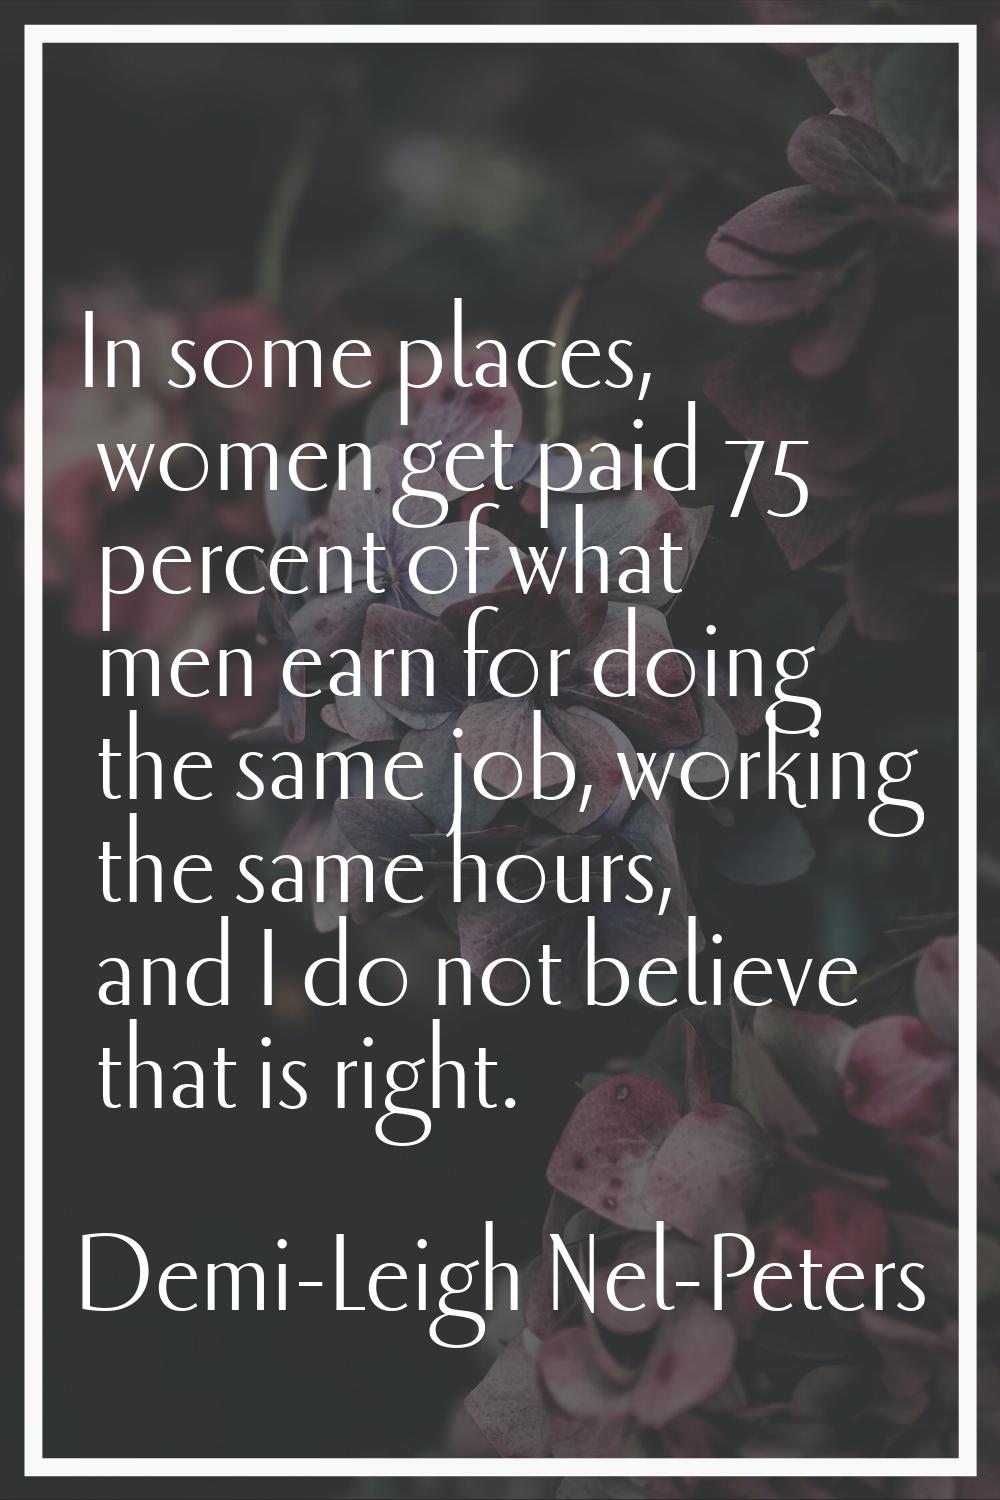 In some places, women get paid 75 percent of what men earn for doing the same job, working the same